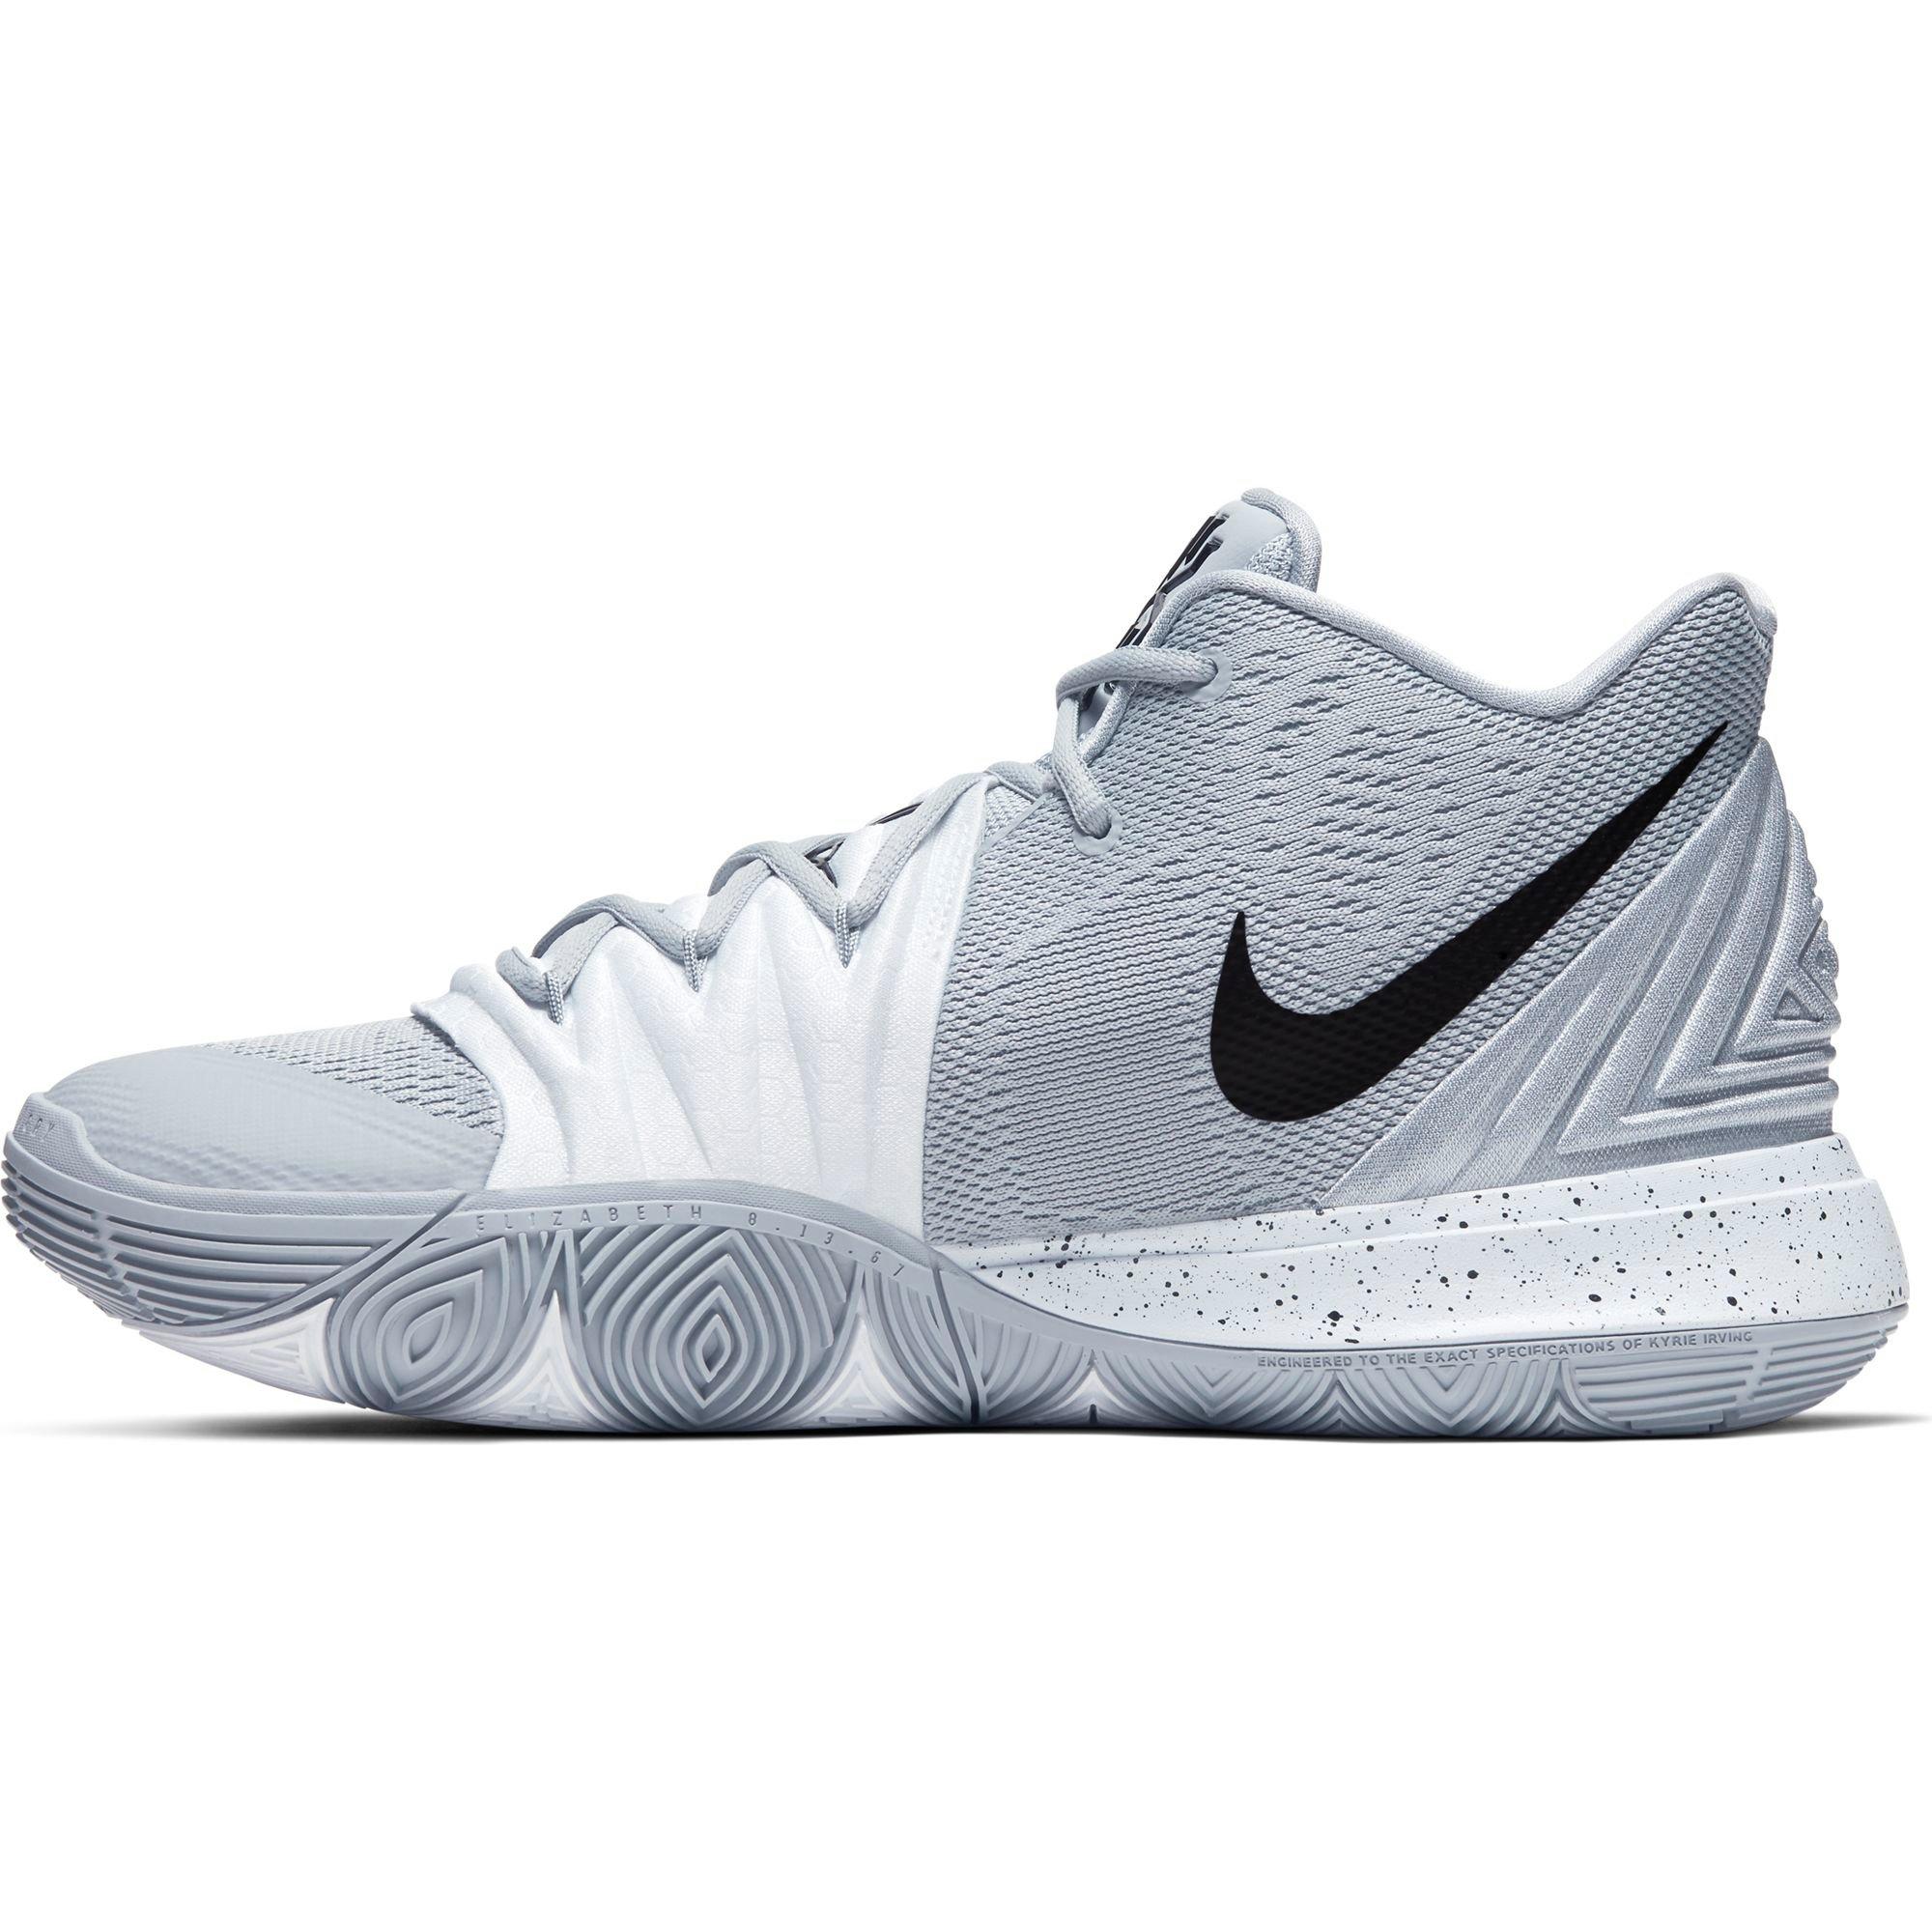 kyrie 5 grey and white